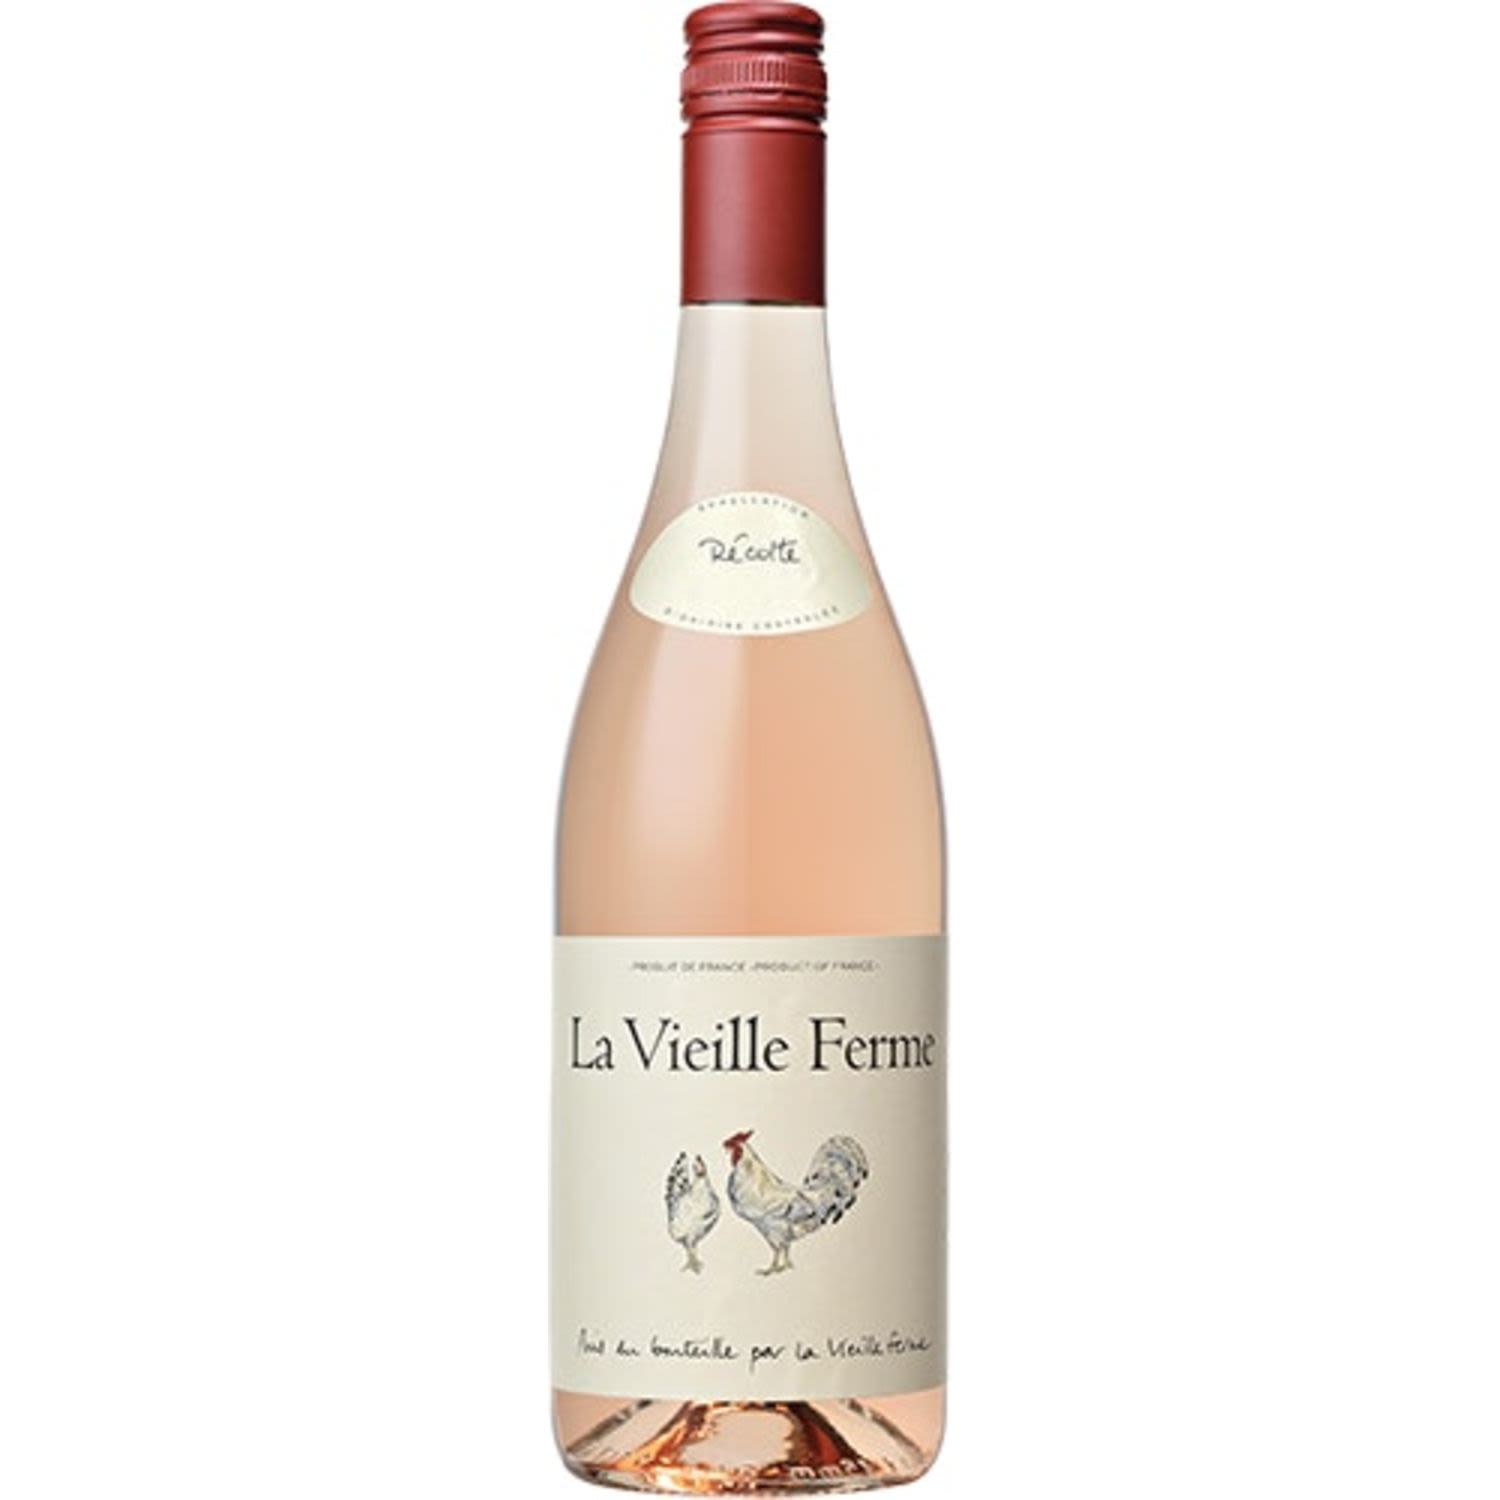 Pretty pale pink colour with pastel undertones. Fresh and very aromatic on the nose, this wine has a delicate bouquet with notes of red fruit (currants, cherries), and citrus. Good balance between sweetness and acidity in the mouth.<br /> <br />Alcohol Volume: 13.00%<br /><br />Pack Format: Bottle<br /><br />Standard Drinks: 7.7</br /><br />Pack Type: Bottle<br /><br />Country of Origin: France<br /><br />Region: Rhone Valley<br /><br />Vintage: '2018<br />